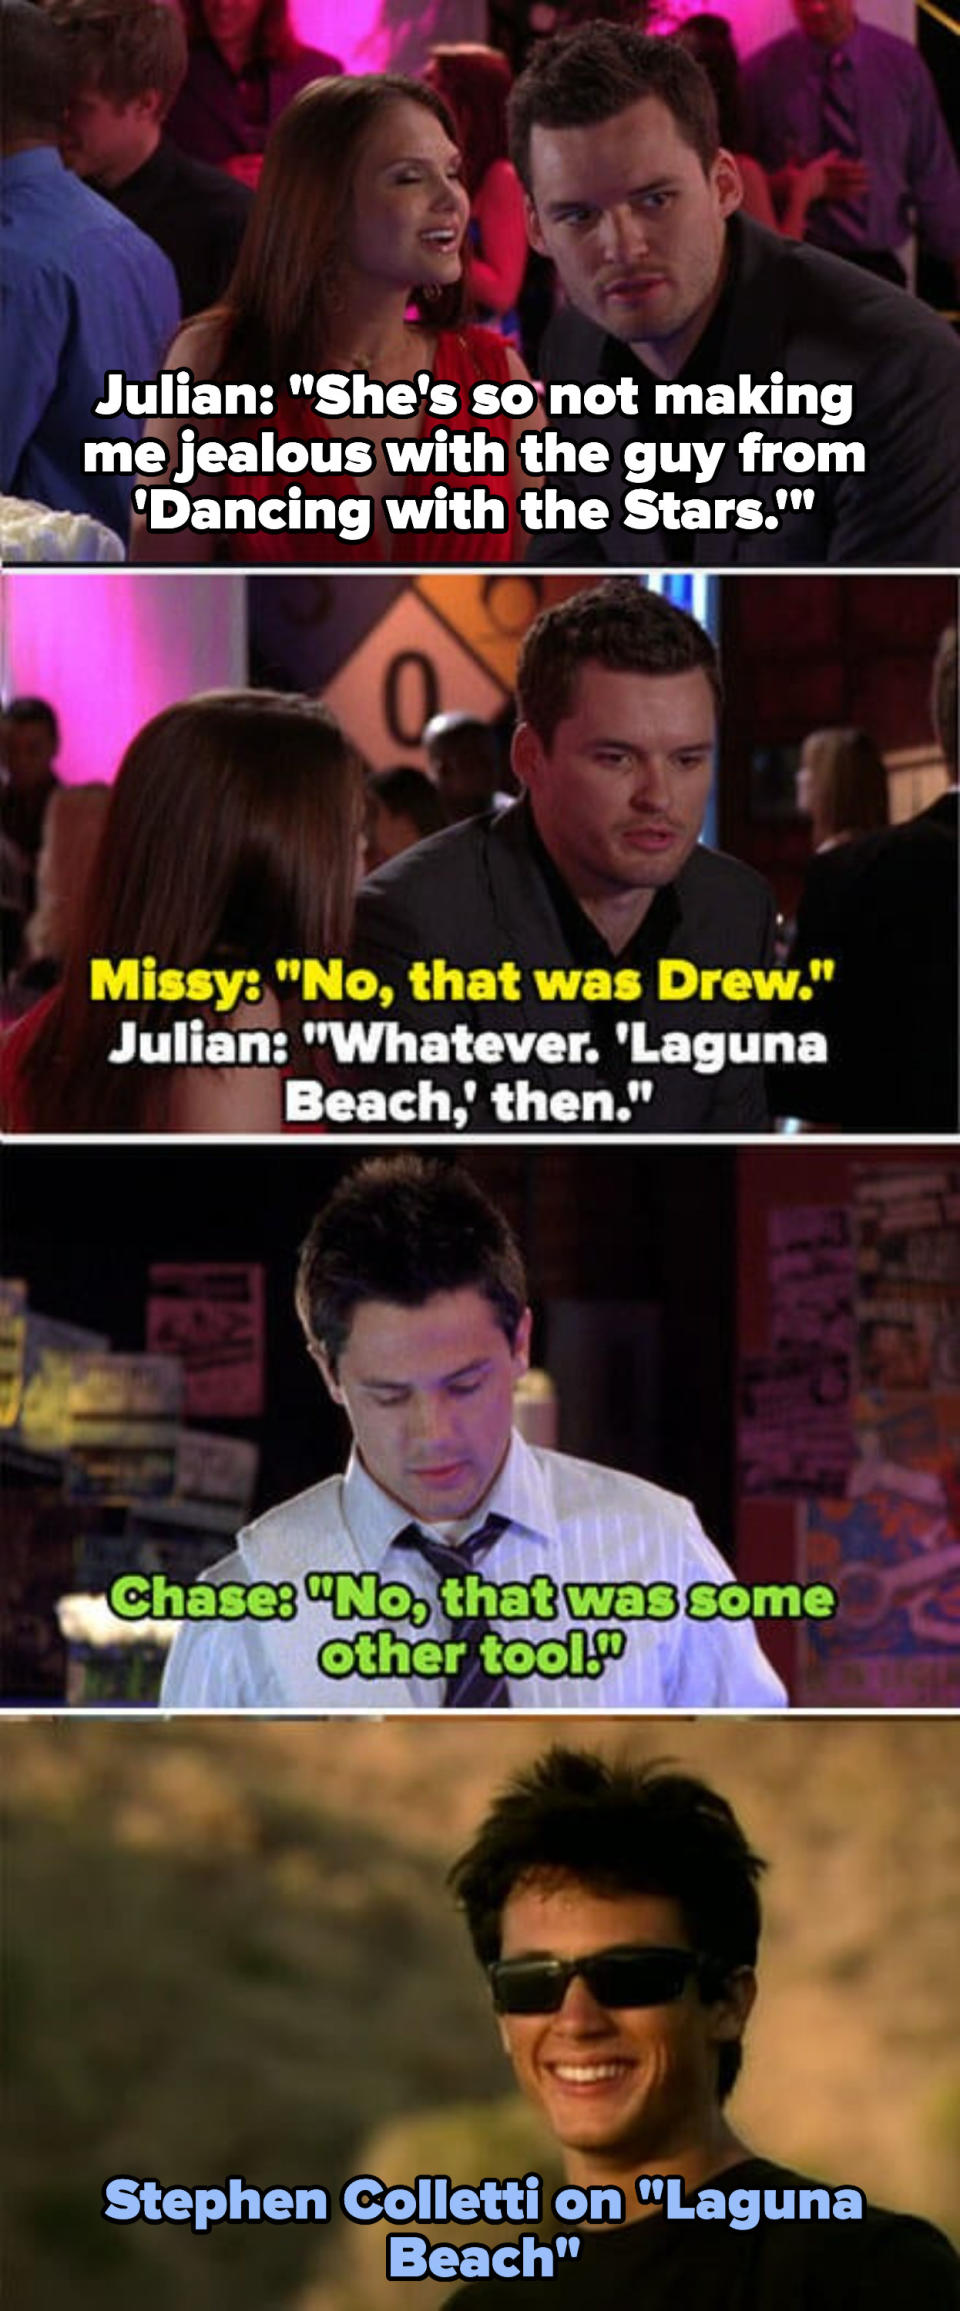 Julian thinks Nick Lachey was on Dancing with the Stars, then Laguna Beach, and Chase (played by Stephen Colletti) walks by and says "No, that was some other tool" and then there's a photo of him on Laguna Beach